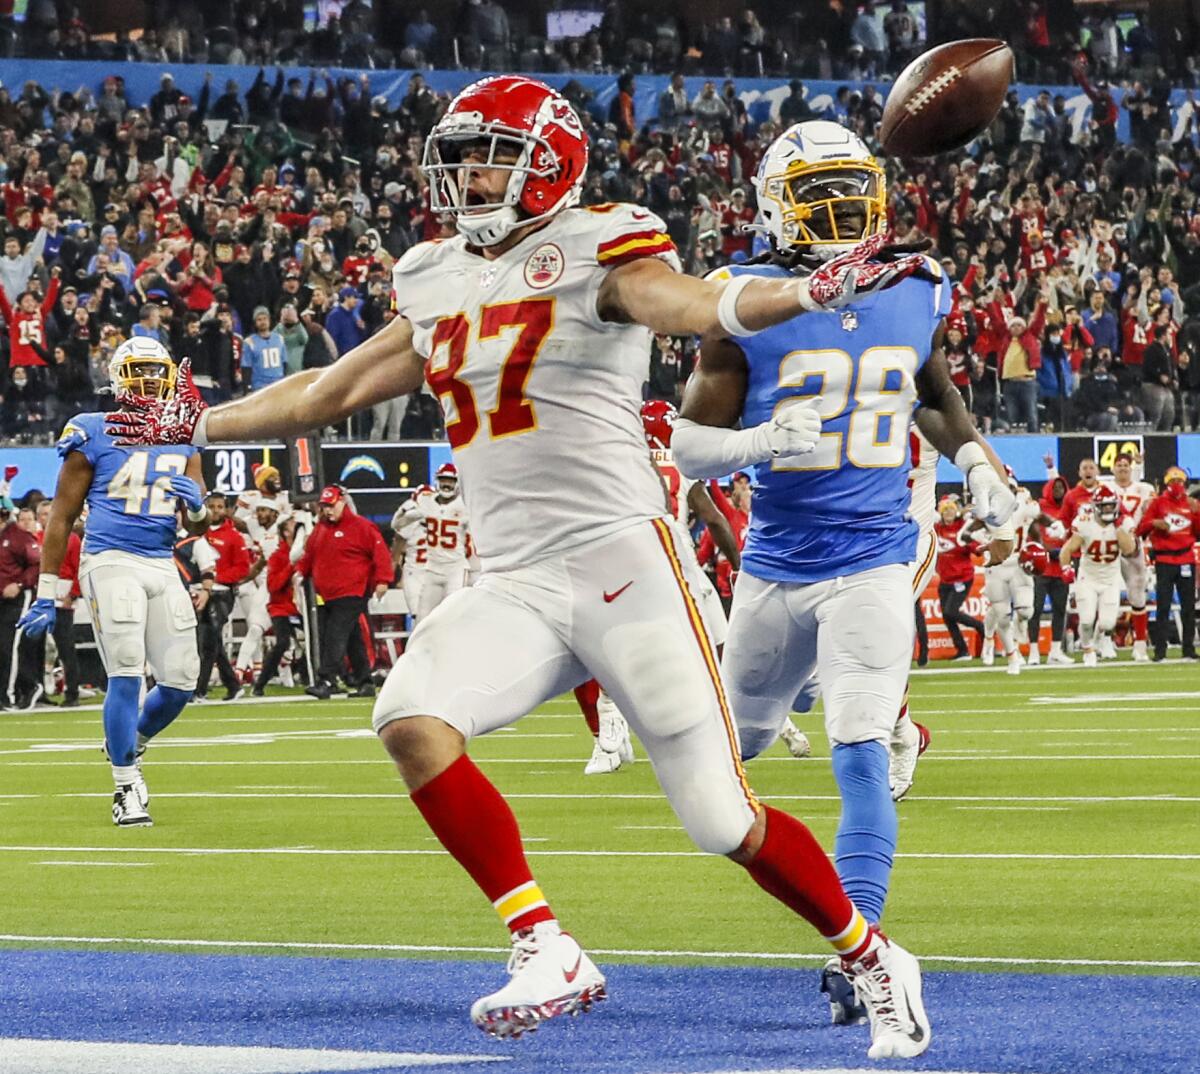 Kansas City tight end Travis Kelce scores a touchdown in overtime in front of Chargers cornerback Davontae Harris.